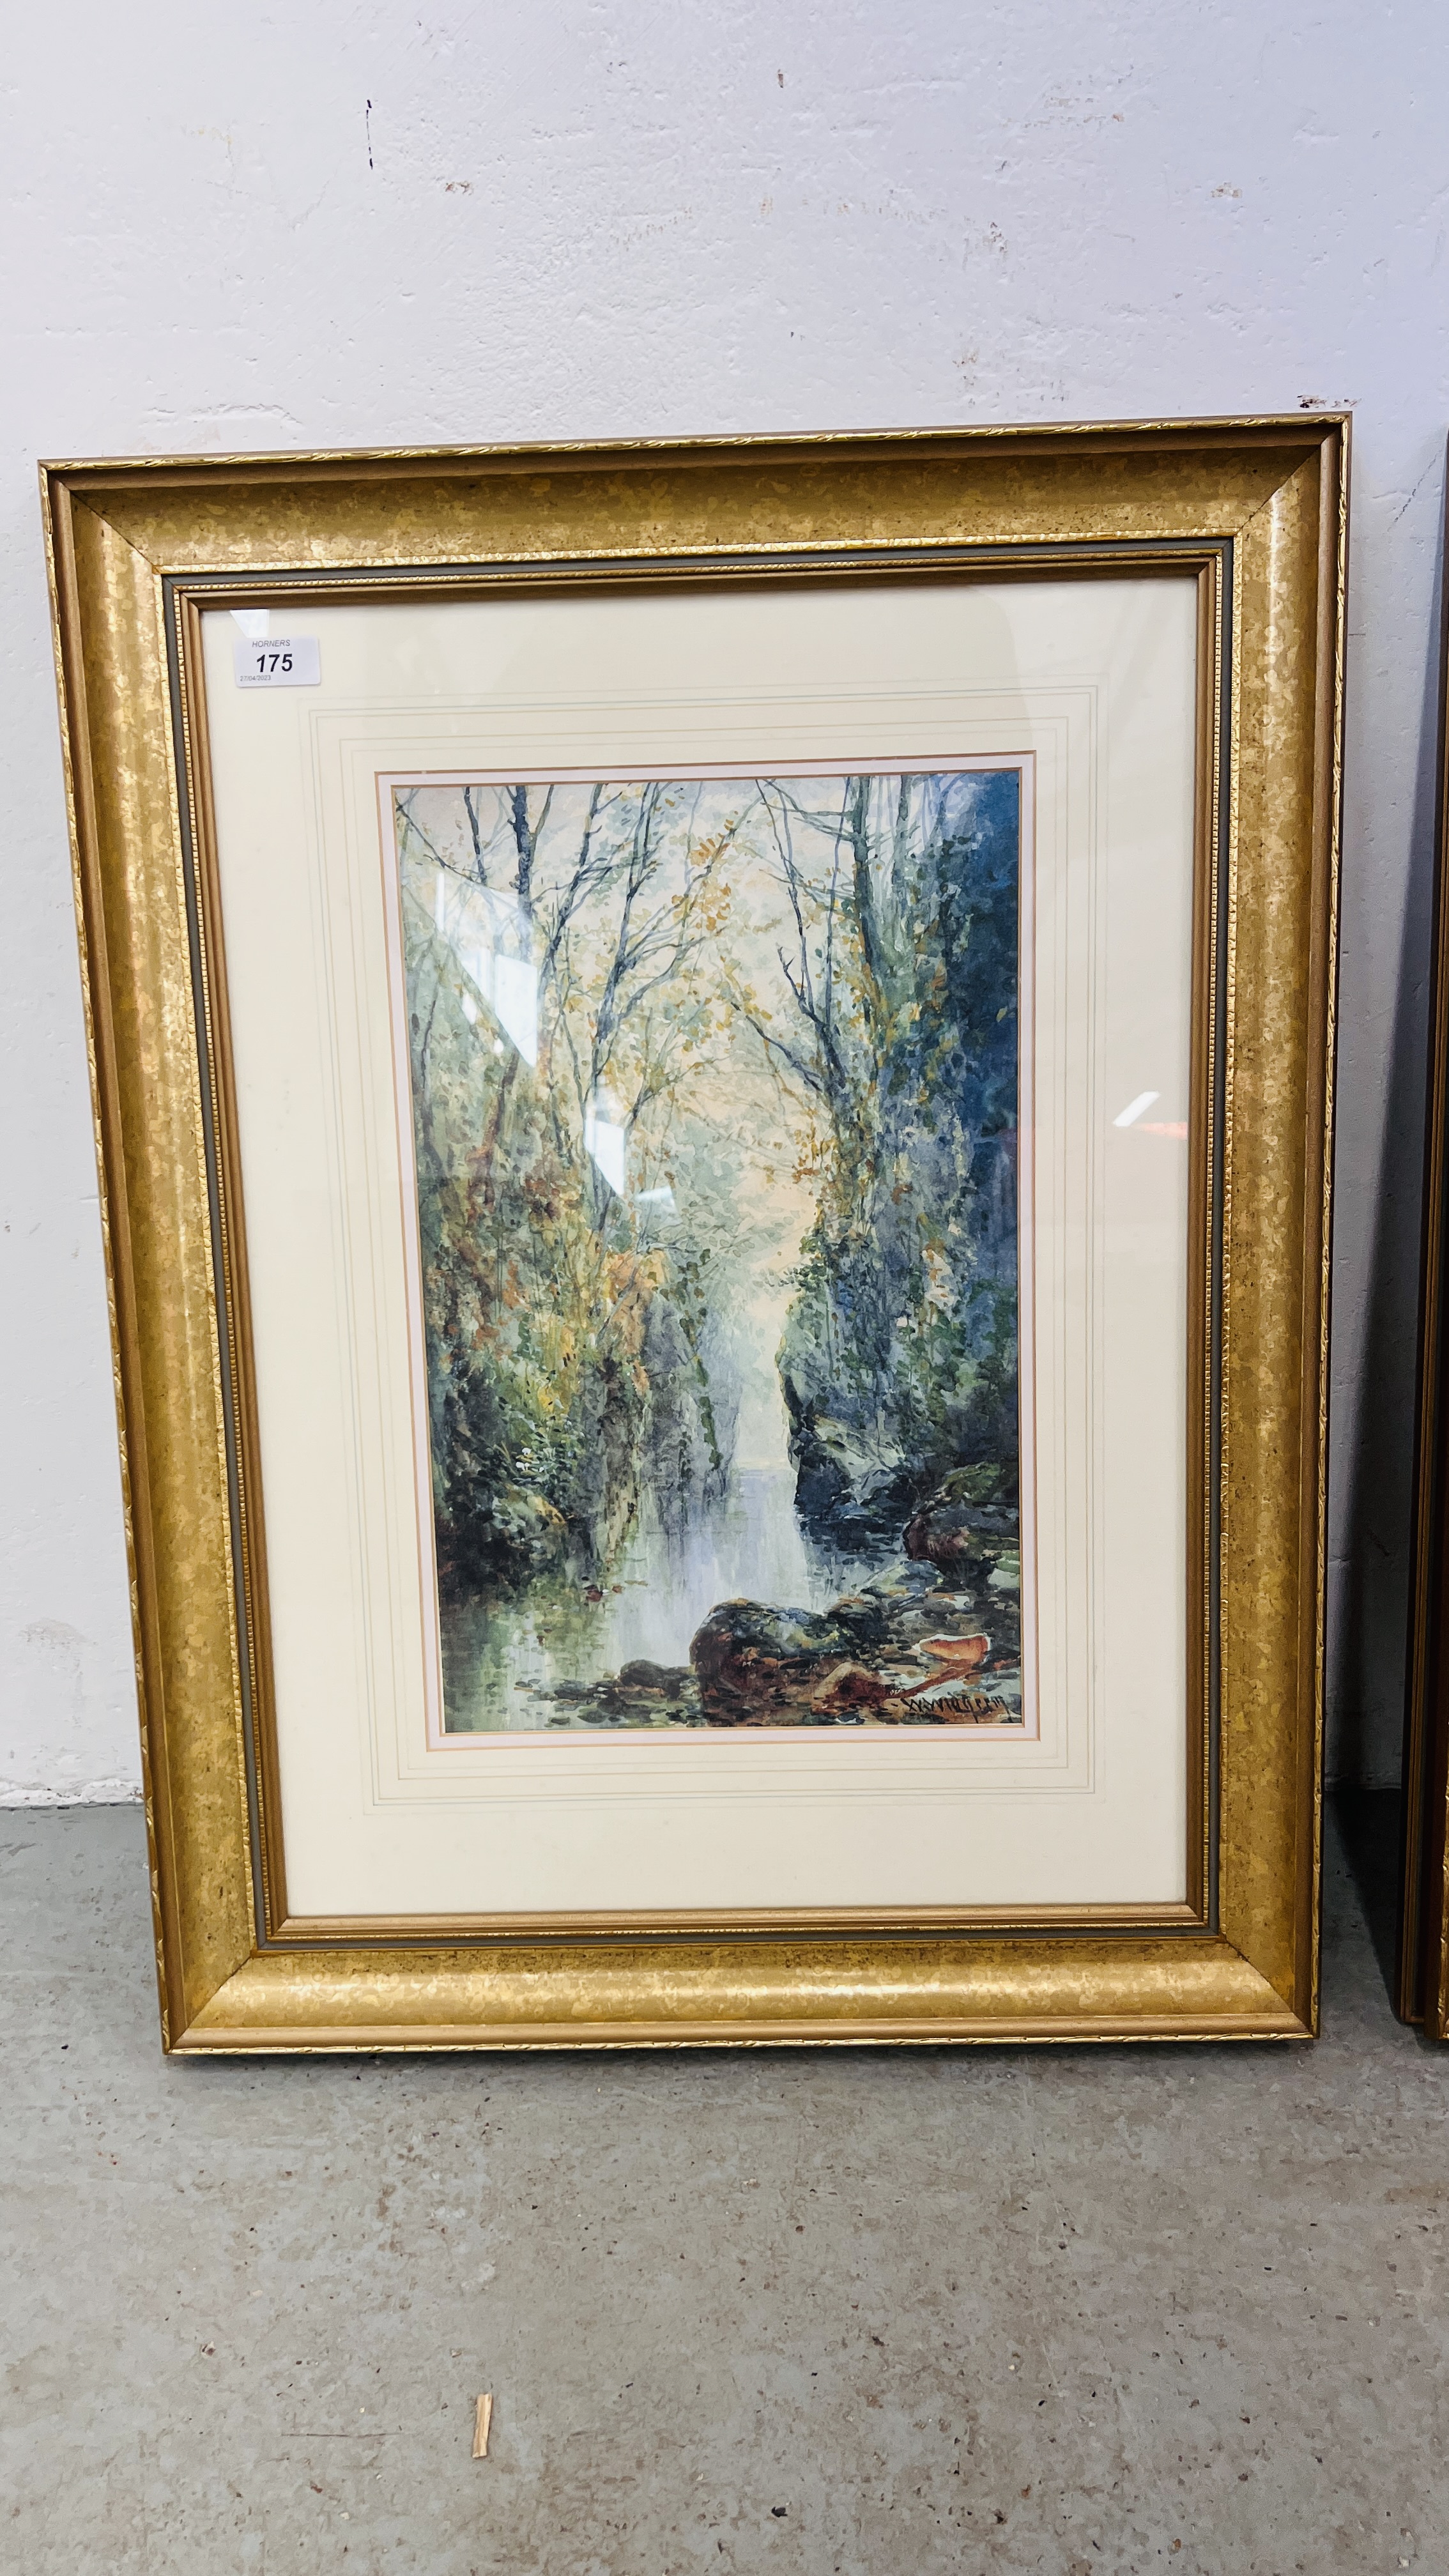 TWO FRAMED AND MOUNTED WATERCOLOURS BEARING SIGNATURE "WOODLAND STREAMS" EACH 45 X 28.5CM. - Image 5 of 5